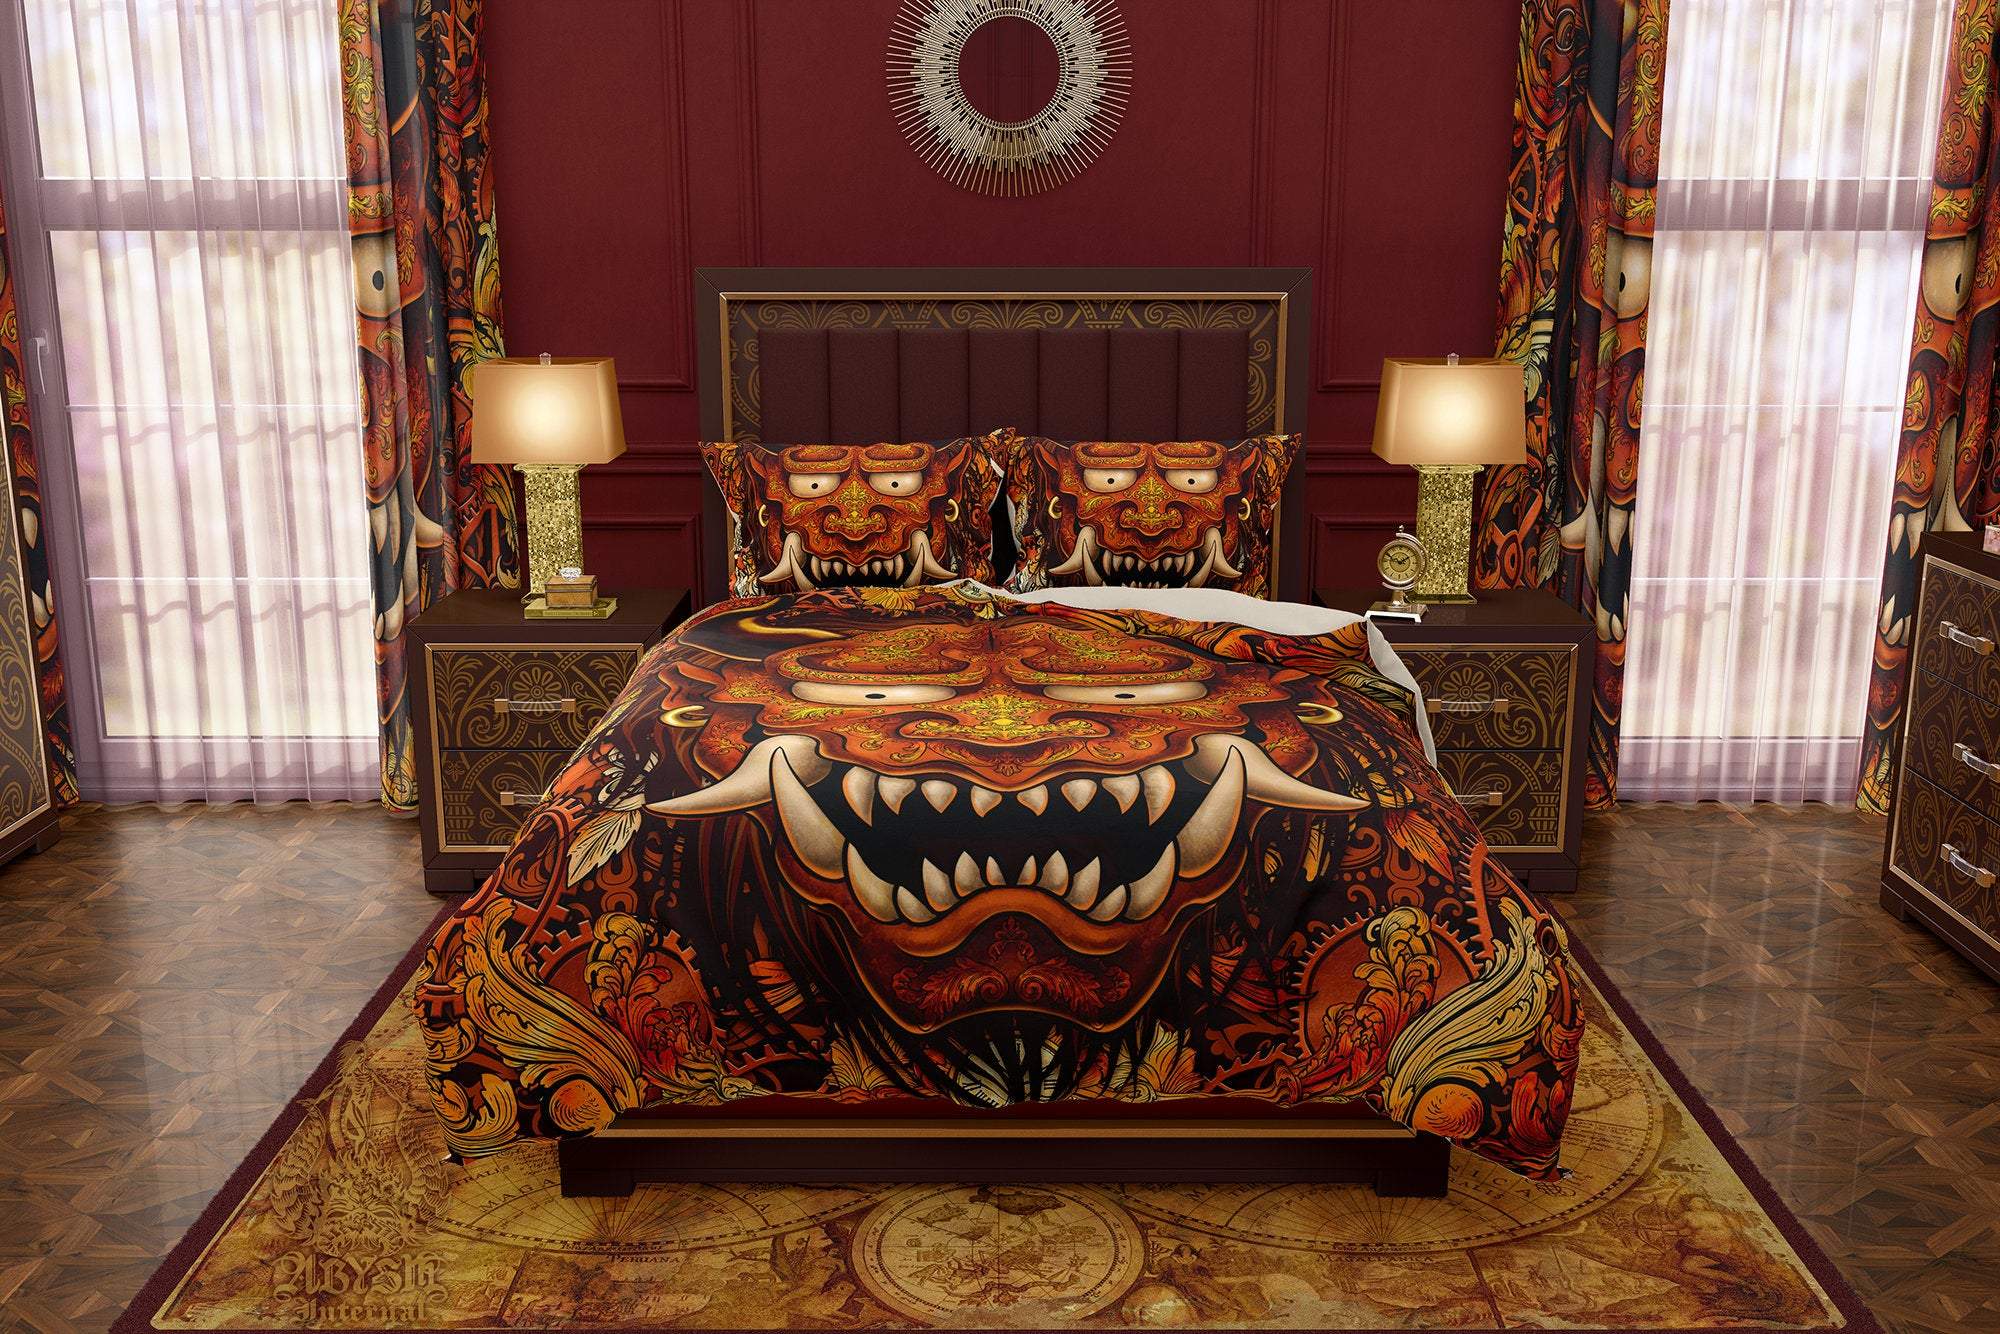 Oni Bedding Set, Comforter and Duvet, Steampunk Bed Cover and Bedroom Decor, King, Queen and Twin Size - Japanese Demon - Abysm Internal